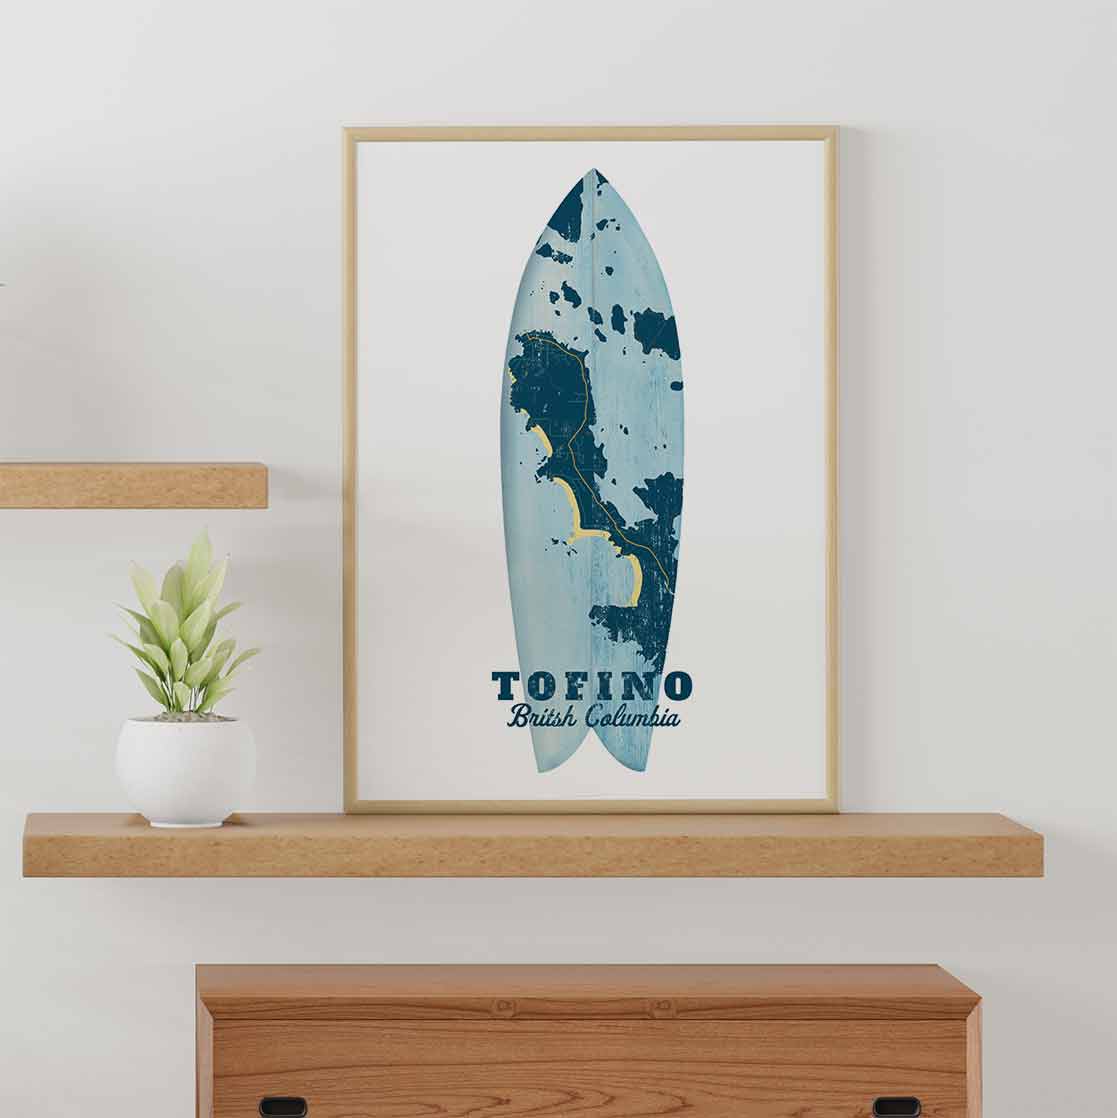 Framed Tofino vintage surf board map print is showing Mackenzie , Cox, Sunset Bench at Middle beach is a classic map